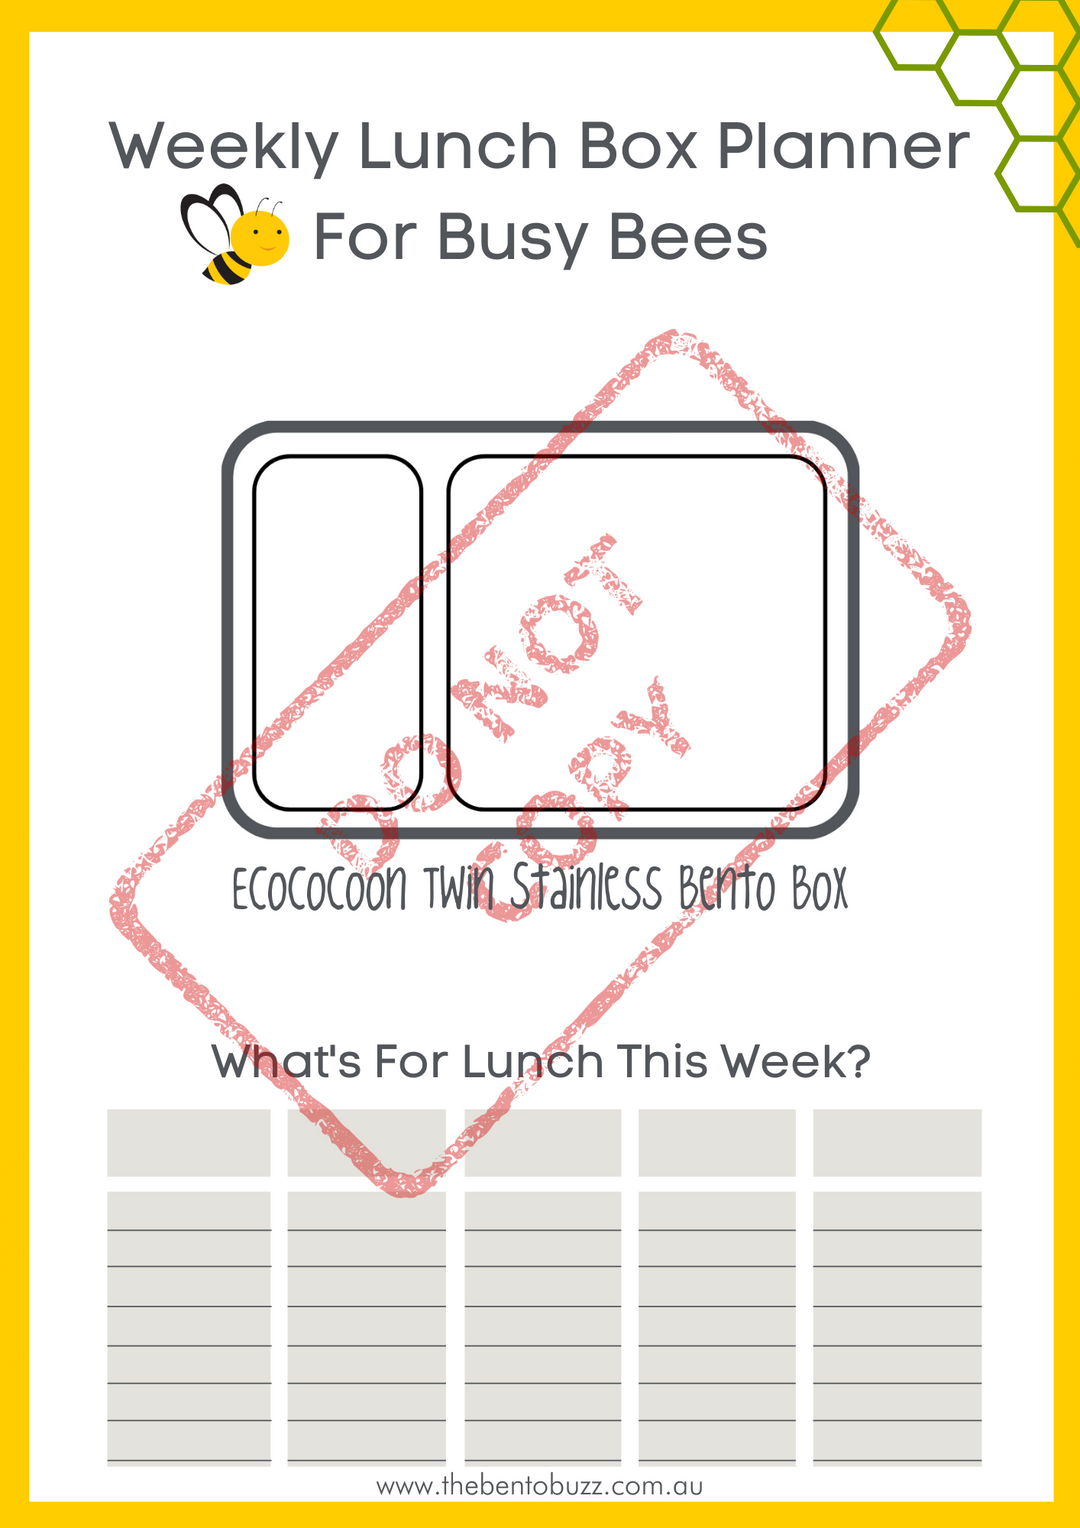 Download & Print Lunch Box Planner - Ecococoon Twin Stainless